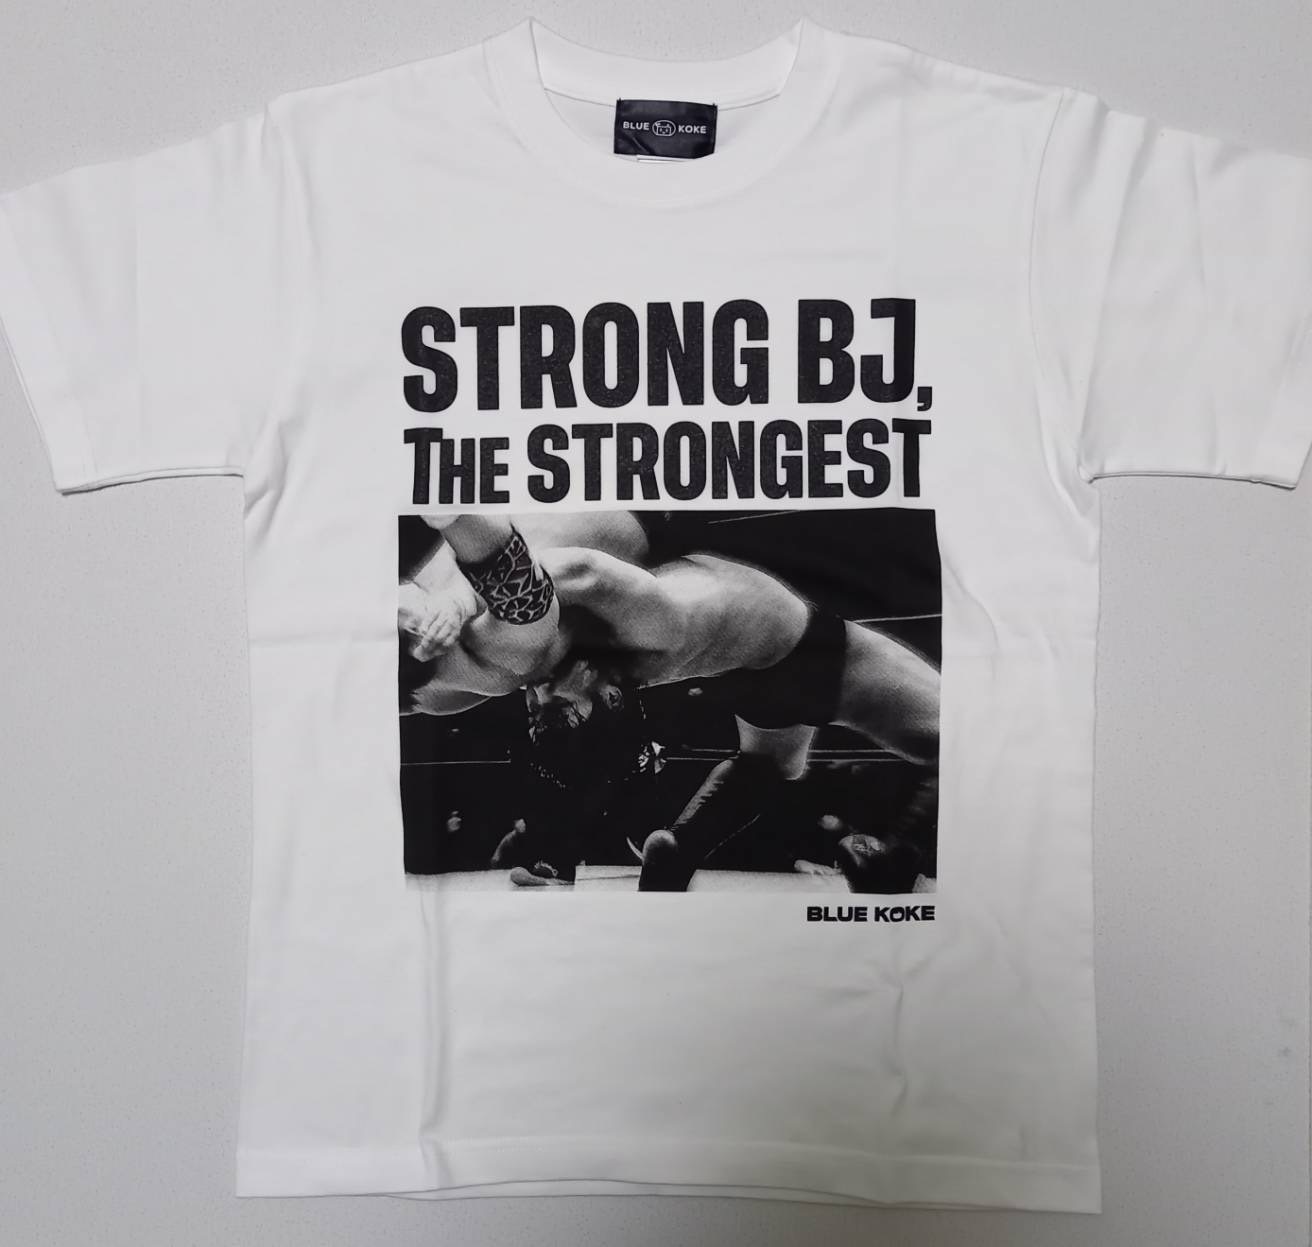 ＜BLUE KOKE collaboration＞野村卓矢「STRONG BJ,THE STRONGEST」Tシャツ(白)